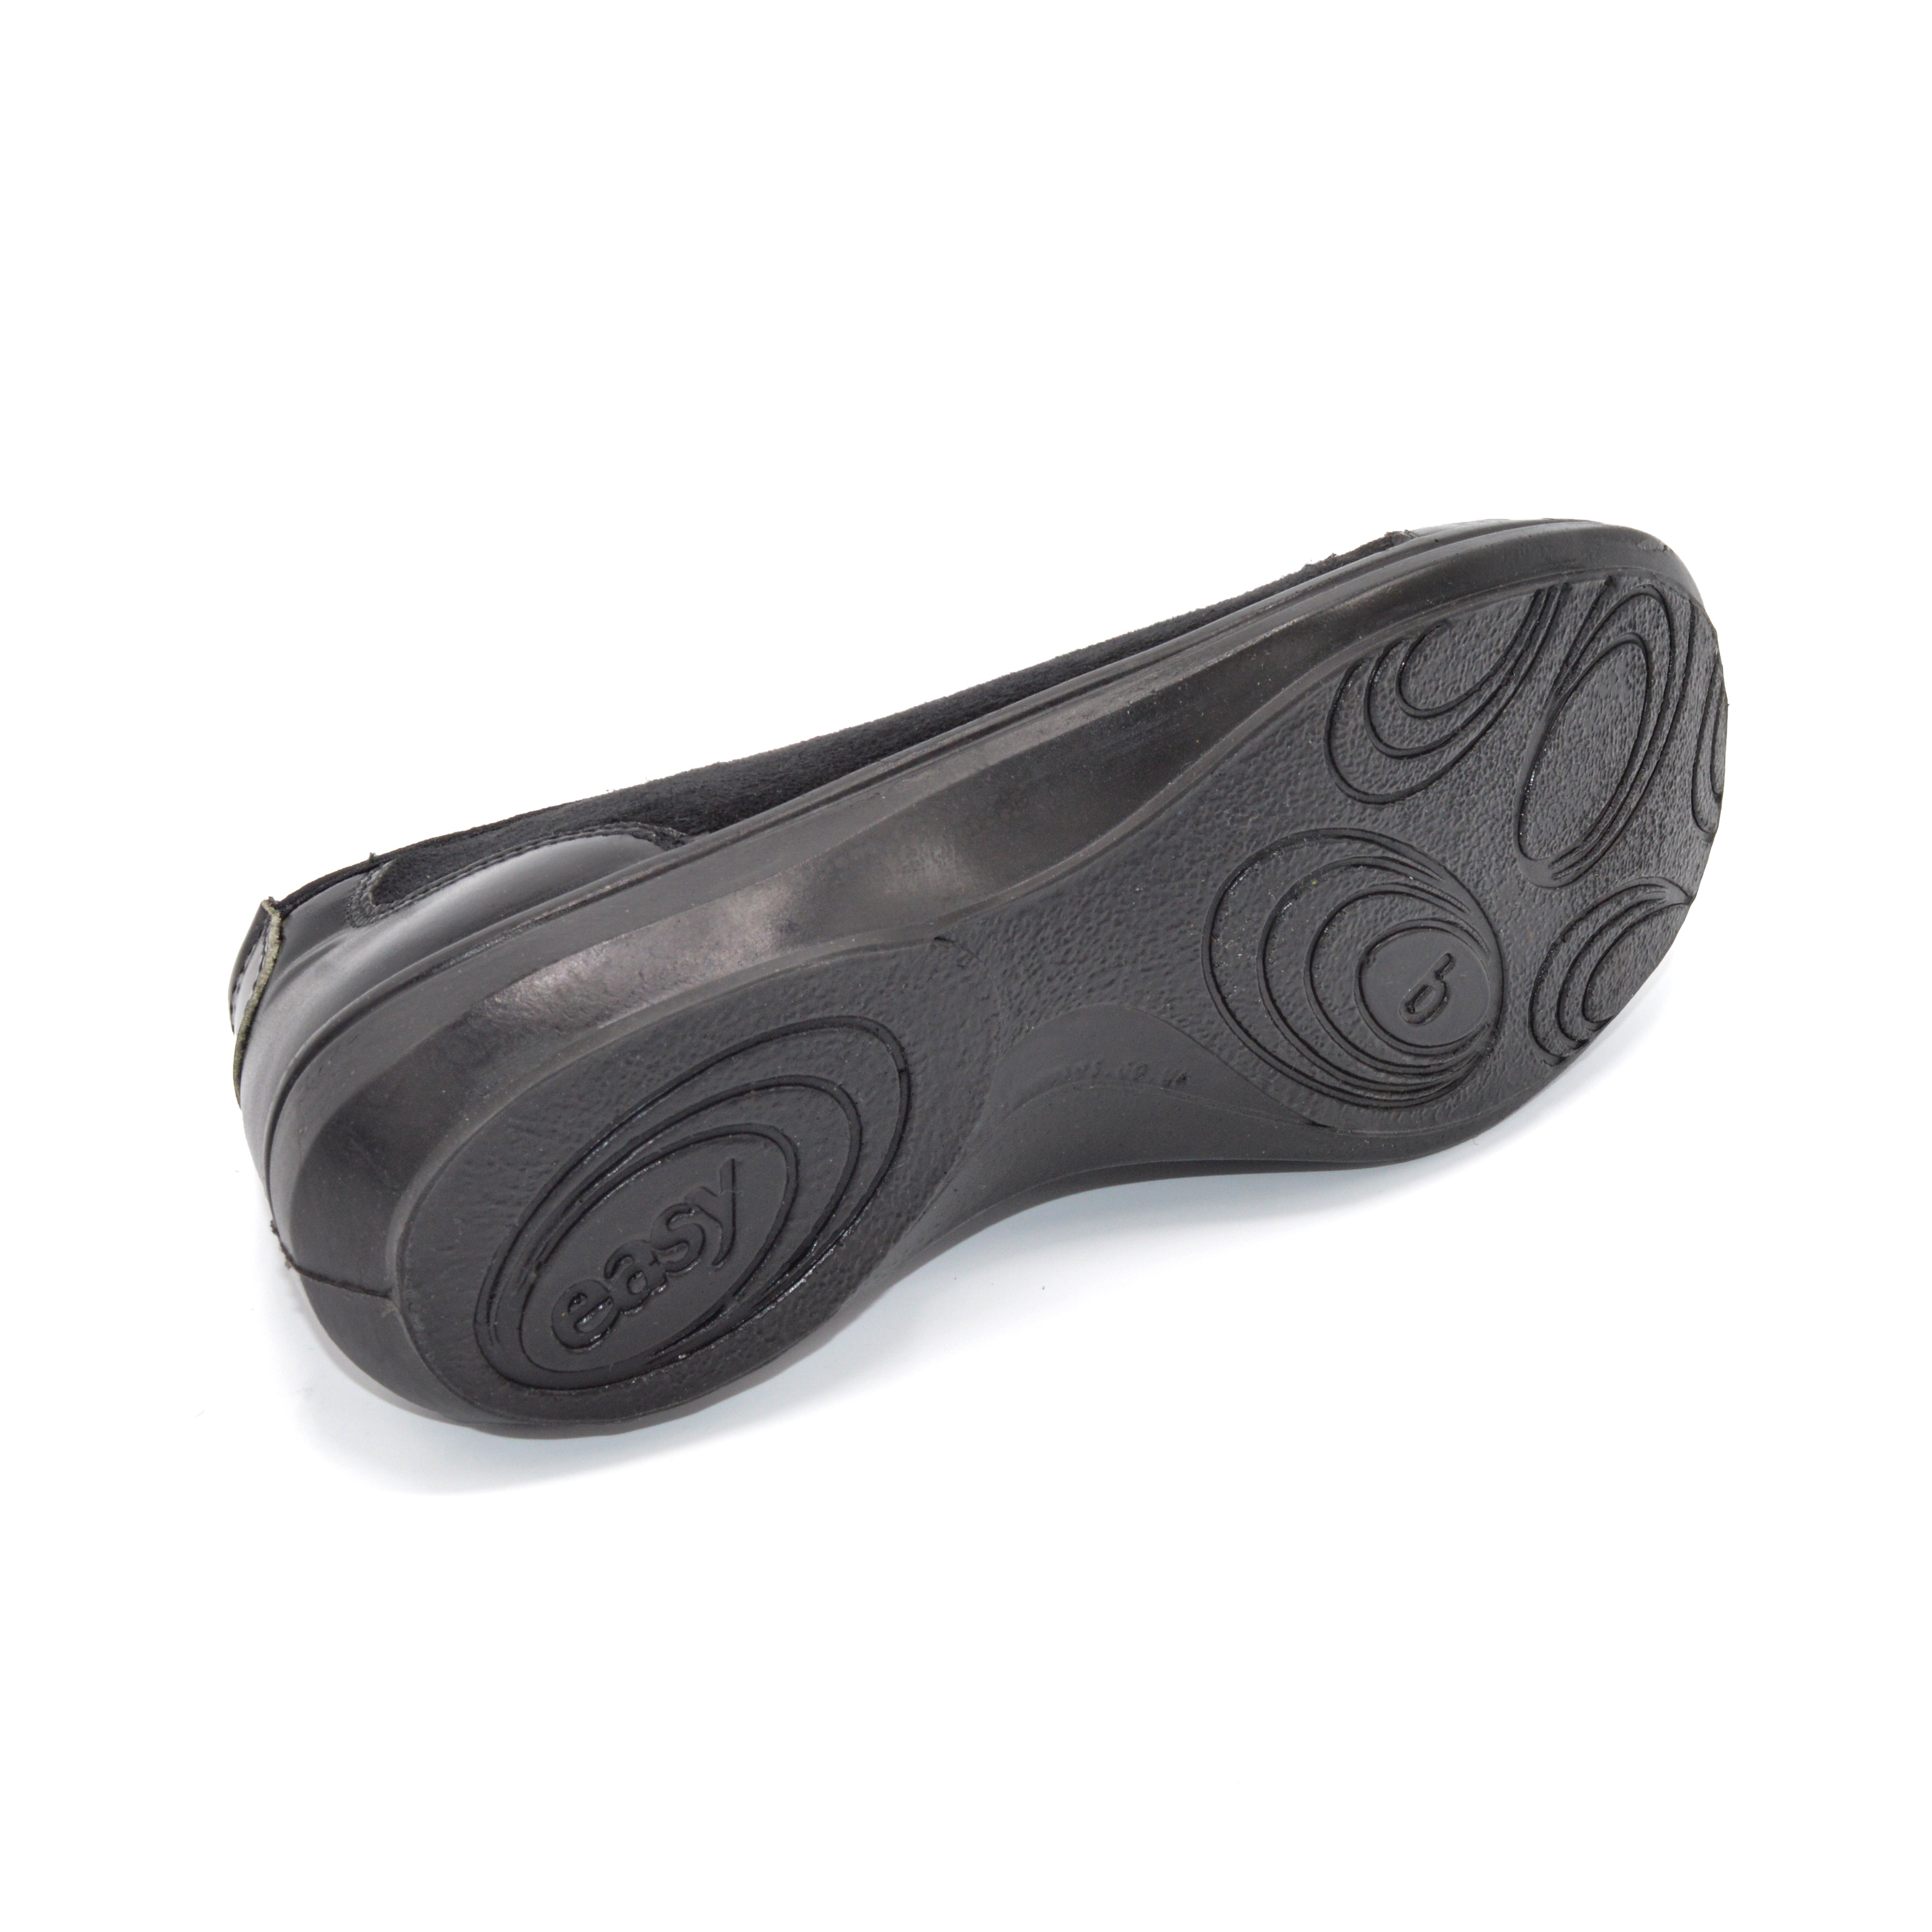 Black Extra Wide Fitting Pump For Swollen Feet